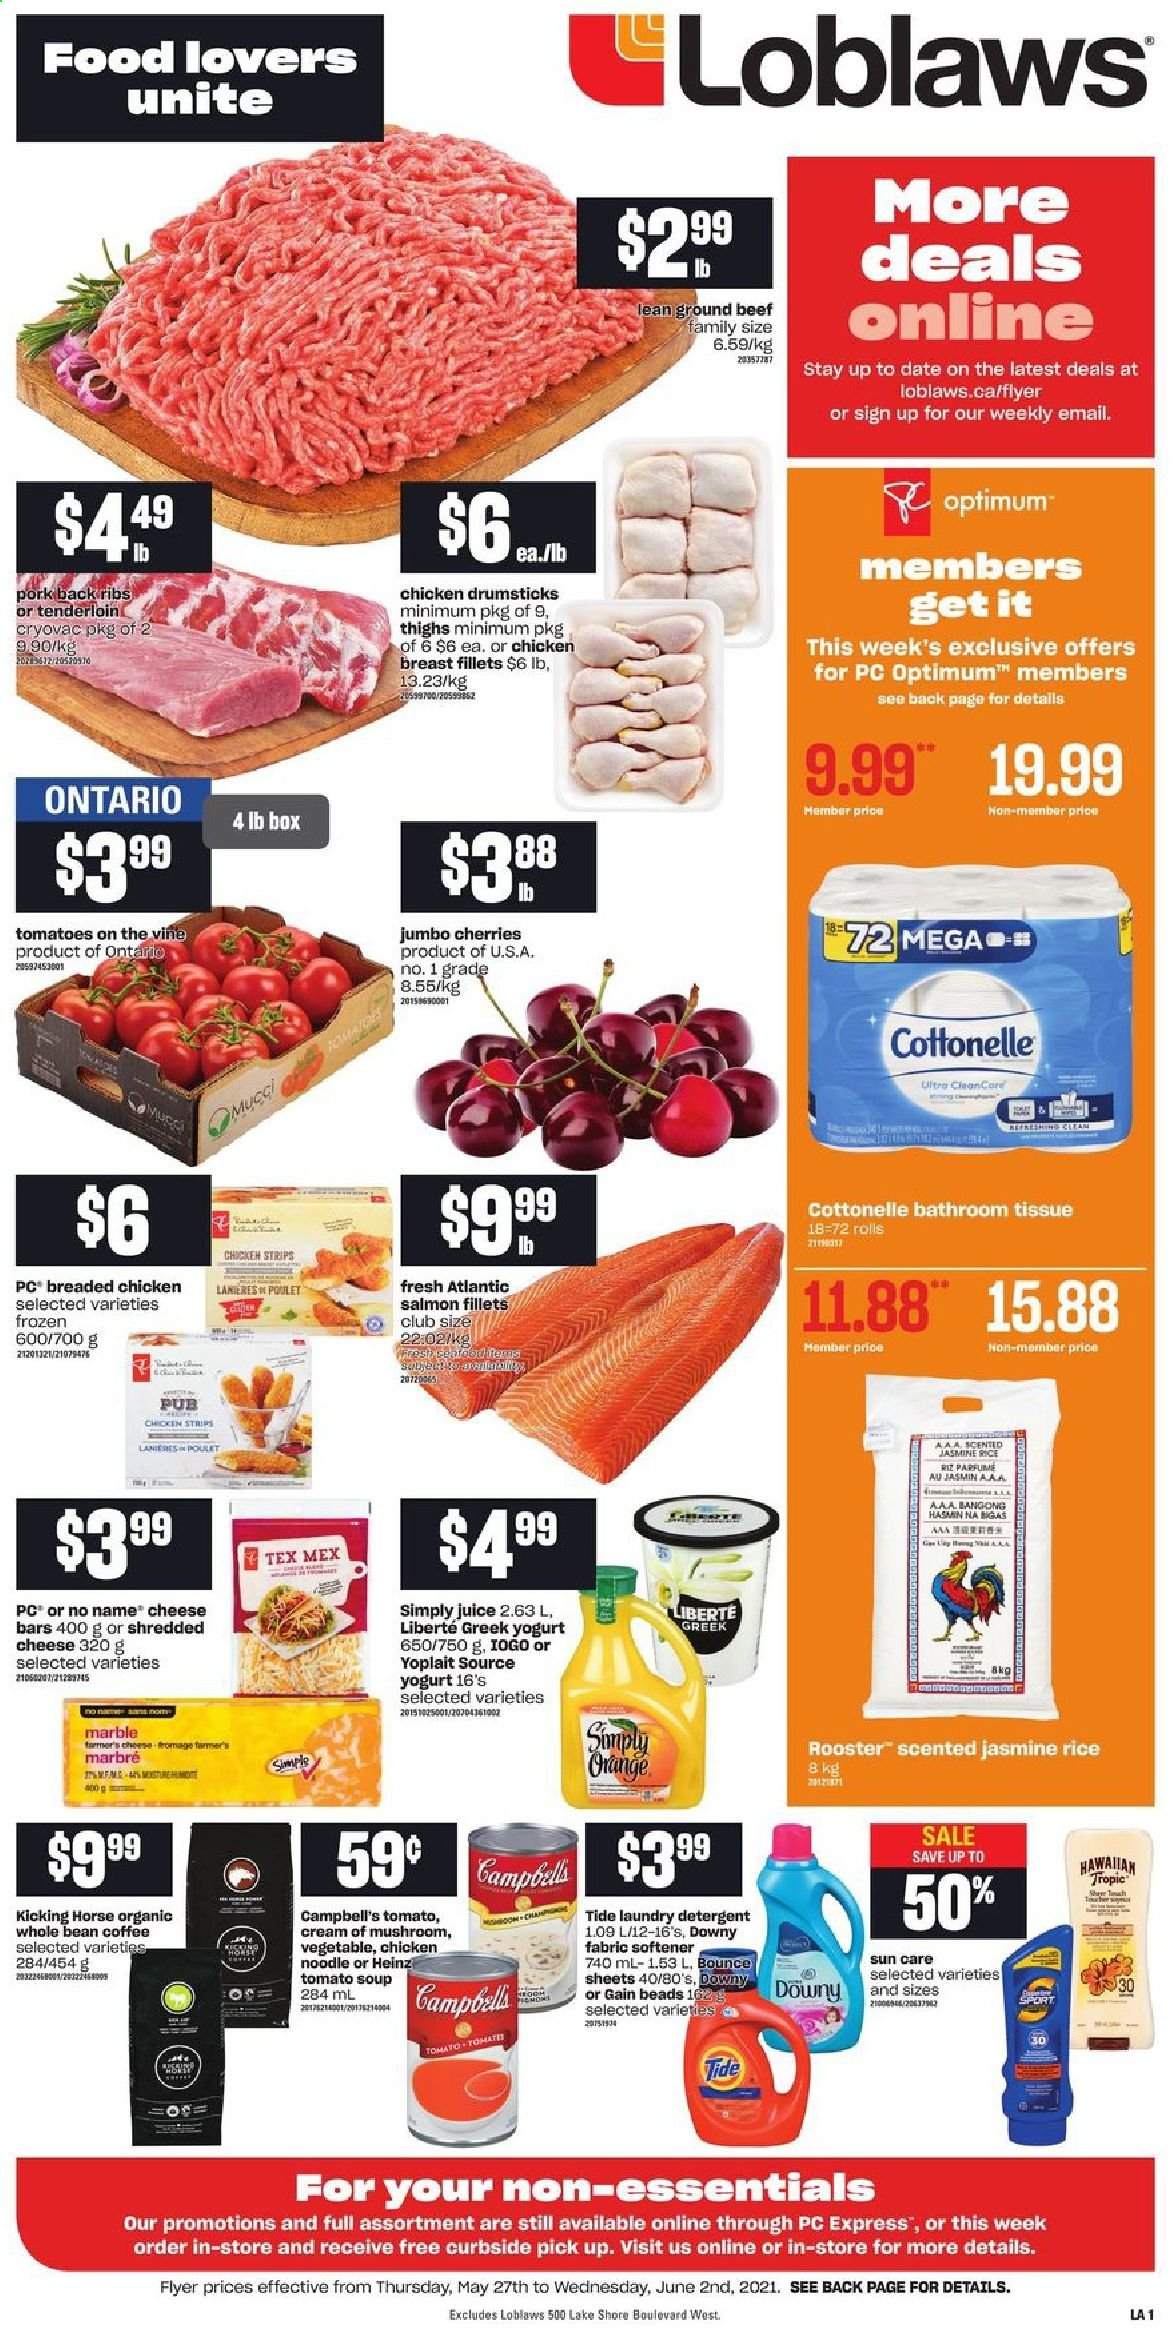 thumbnail - Loblaws Flyer - May 27, 2021 - June 02, 2021 - Sales products - tomatoes, cherries, salmon, salmon fillet, No Name, Campbell's, tomato soup, soup, fried chicken, noodles, shredded cheese, greek yoghurt, yoghurt, Yoplait, strips, chicken strips, Heinz, rice, jasmine rice, juice, coffee, chicken drumsticks, chicken, beef meat, ground beef, pork meat, pork ribs, pork back ribs, bath tissue, Cottonelle, Gain, Tide, fabric softener, laundry detergent, Bounce, Downy Laundry, Optimum. Page 1.